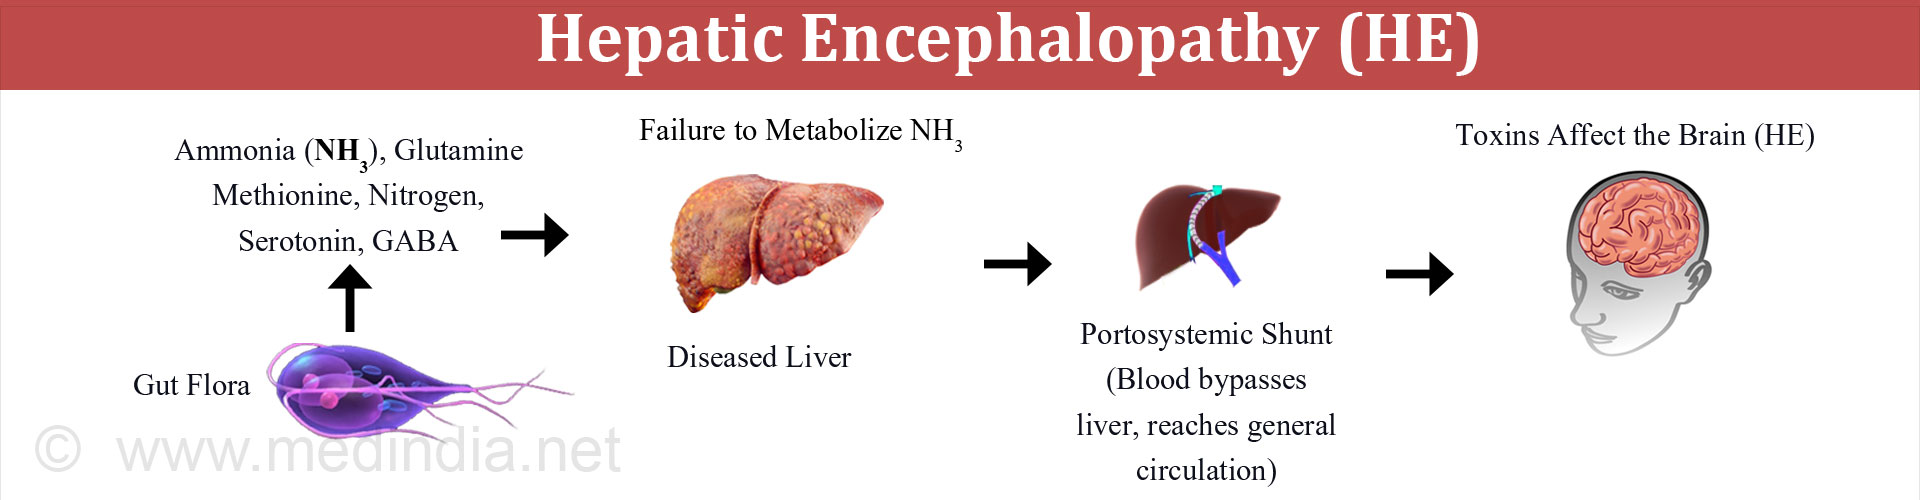 Hepatic Encephalopathy - Causes, Types, Stages, Symptoms, Diagnosis ...